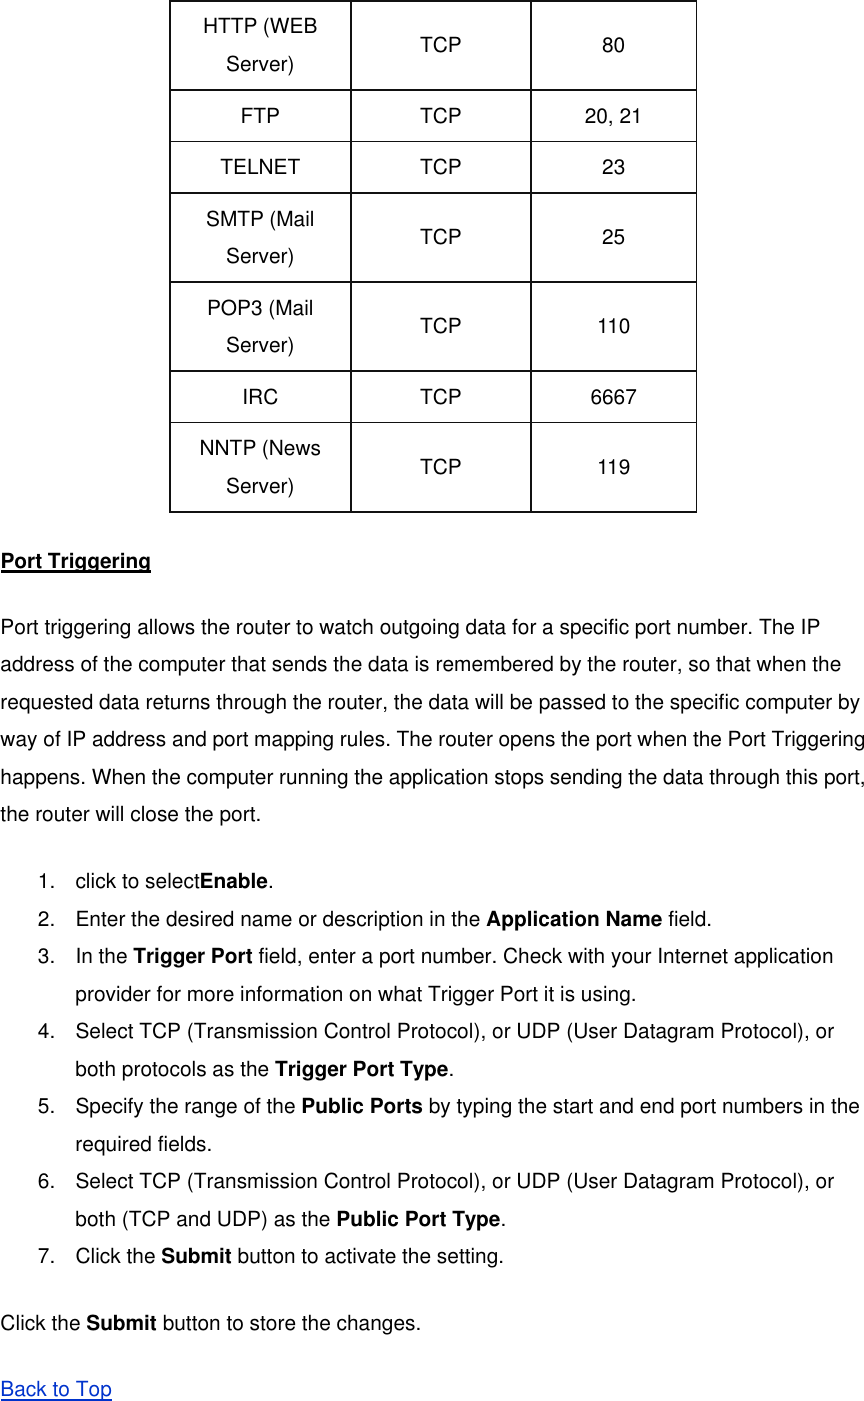 HTTP (WEB Server)  TCP 80 FTP TCP 20, 21 TELNET TCP  23 SMTP (Mail Server)  TCP 25 POP3 (Mail Server)  TCP 110 IRC TCP 6667 NNTP (News Server)  TCP 119 Port Triggering Port triggering allows the router to watch outgoing data for a specific port number. The IP address of the computer that sends the data is remembered by the router, so that when the requested data returns through the router, the data will be passed to the specific computer by way of IP address and port mapping rules. The router opens the port when the Port Triggering happens. When the computer running the application stops sending the data through this port, the router will close the port. 1.  click to selectEnable.  2.  Enter the desired name or description in the Application Name field.   3. In the Trigger Port field, enter a port number. Check with your Internet application provider for more information on what Trigger Port it is using.   4.  Select TCP (Transmission Control Protocol), or UDP (User Datagram Protocol), or both protocols as the Trigger Port Type.  5.  Specify the range of the Public Ports by typing the start and end port numbers in the required fields.   6.  Select TCP (Transmission Control Protocol), or UDP (User Datagram Protocol), or both (TCP and UDP) as the Public Port Type.  7. Click the Submit button to activate the setting. Click the Submit button to store the changes. Back to Top 